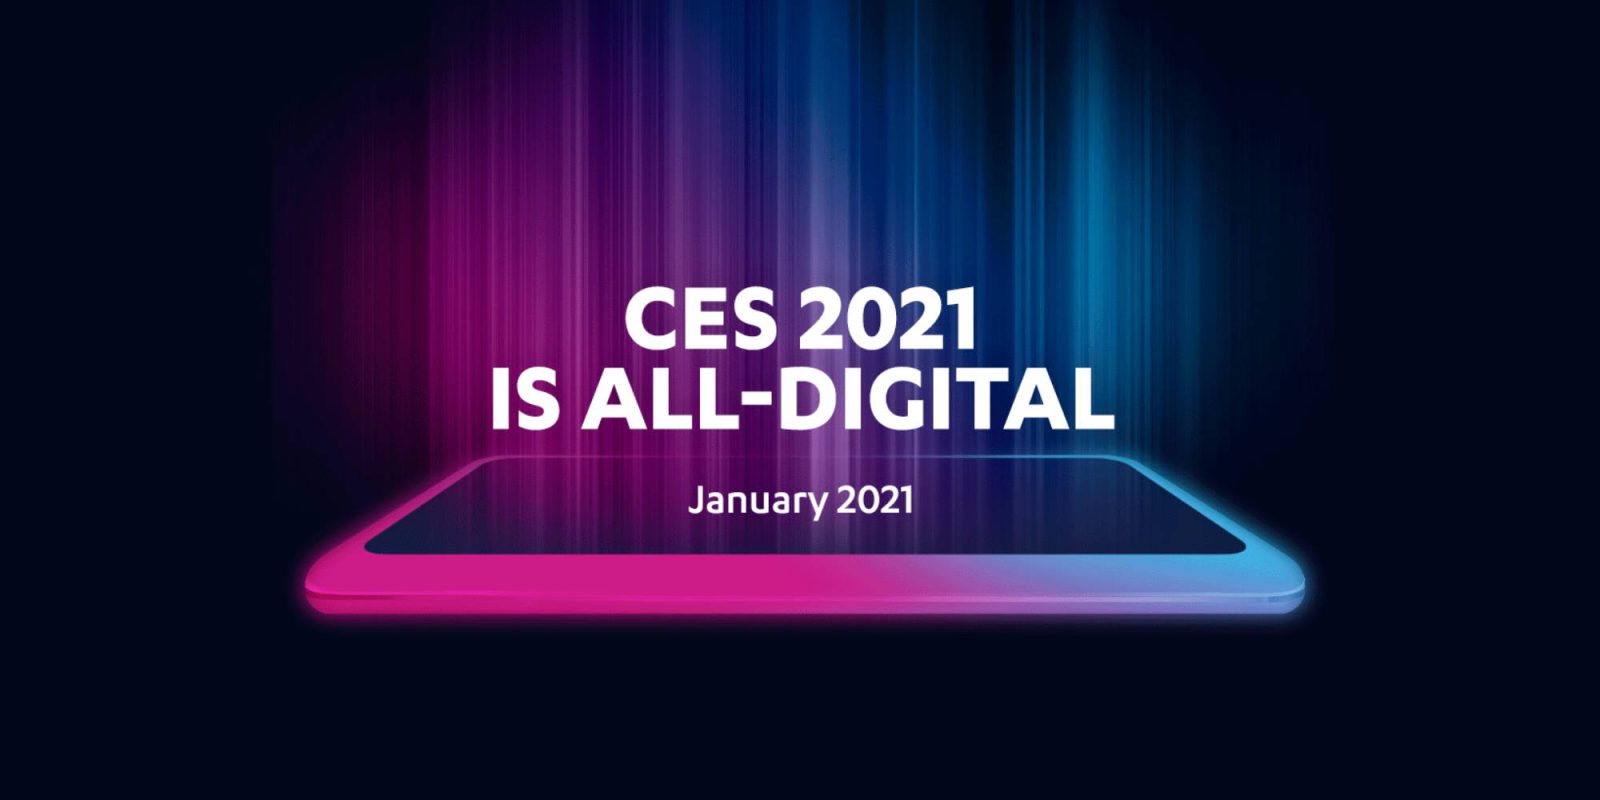 Ces 21 Shifts Its Digital Event To New Dates January 11 14 Dronedj